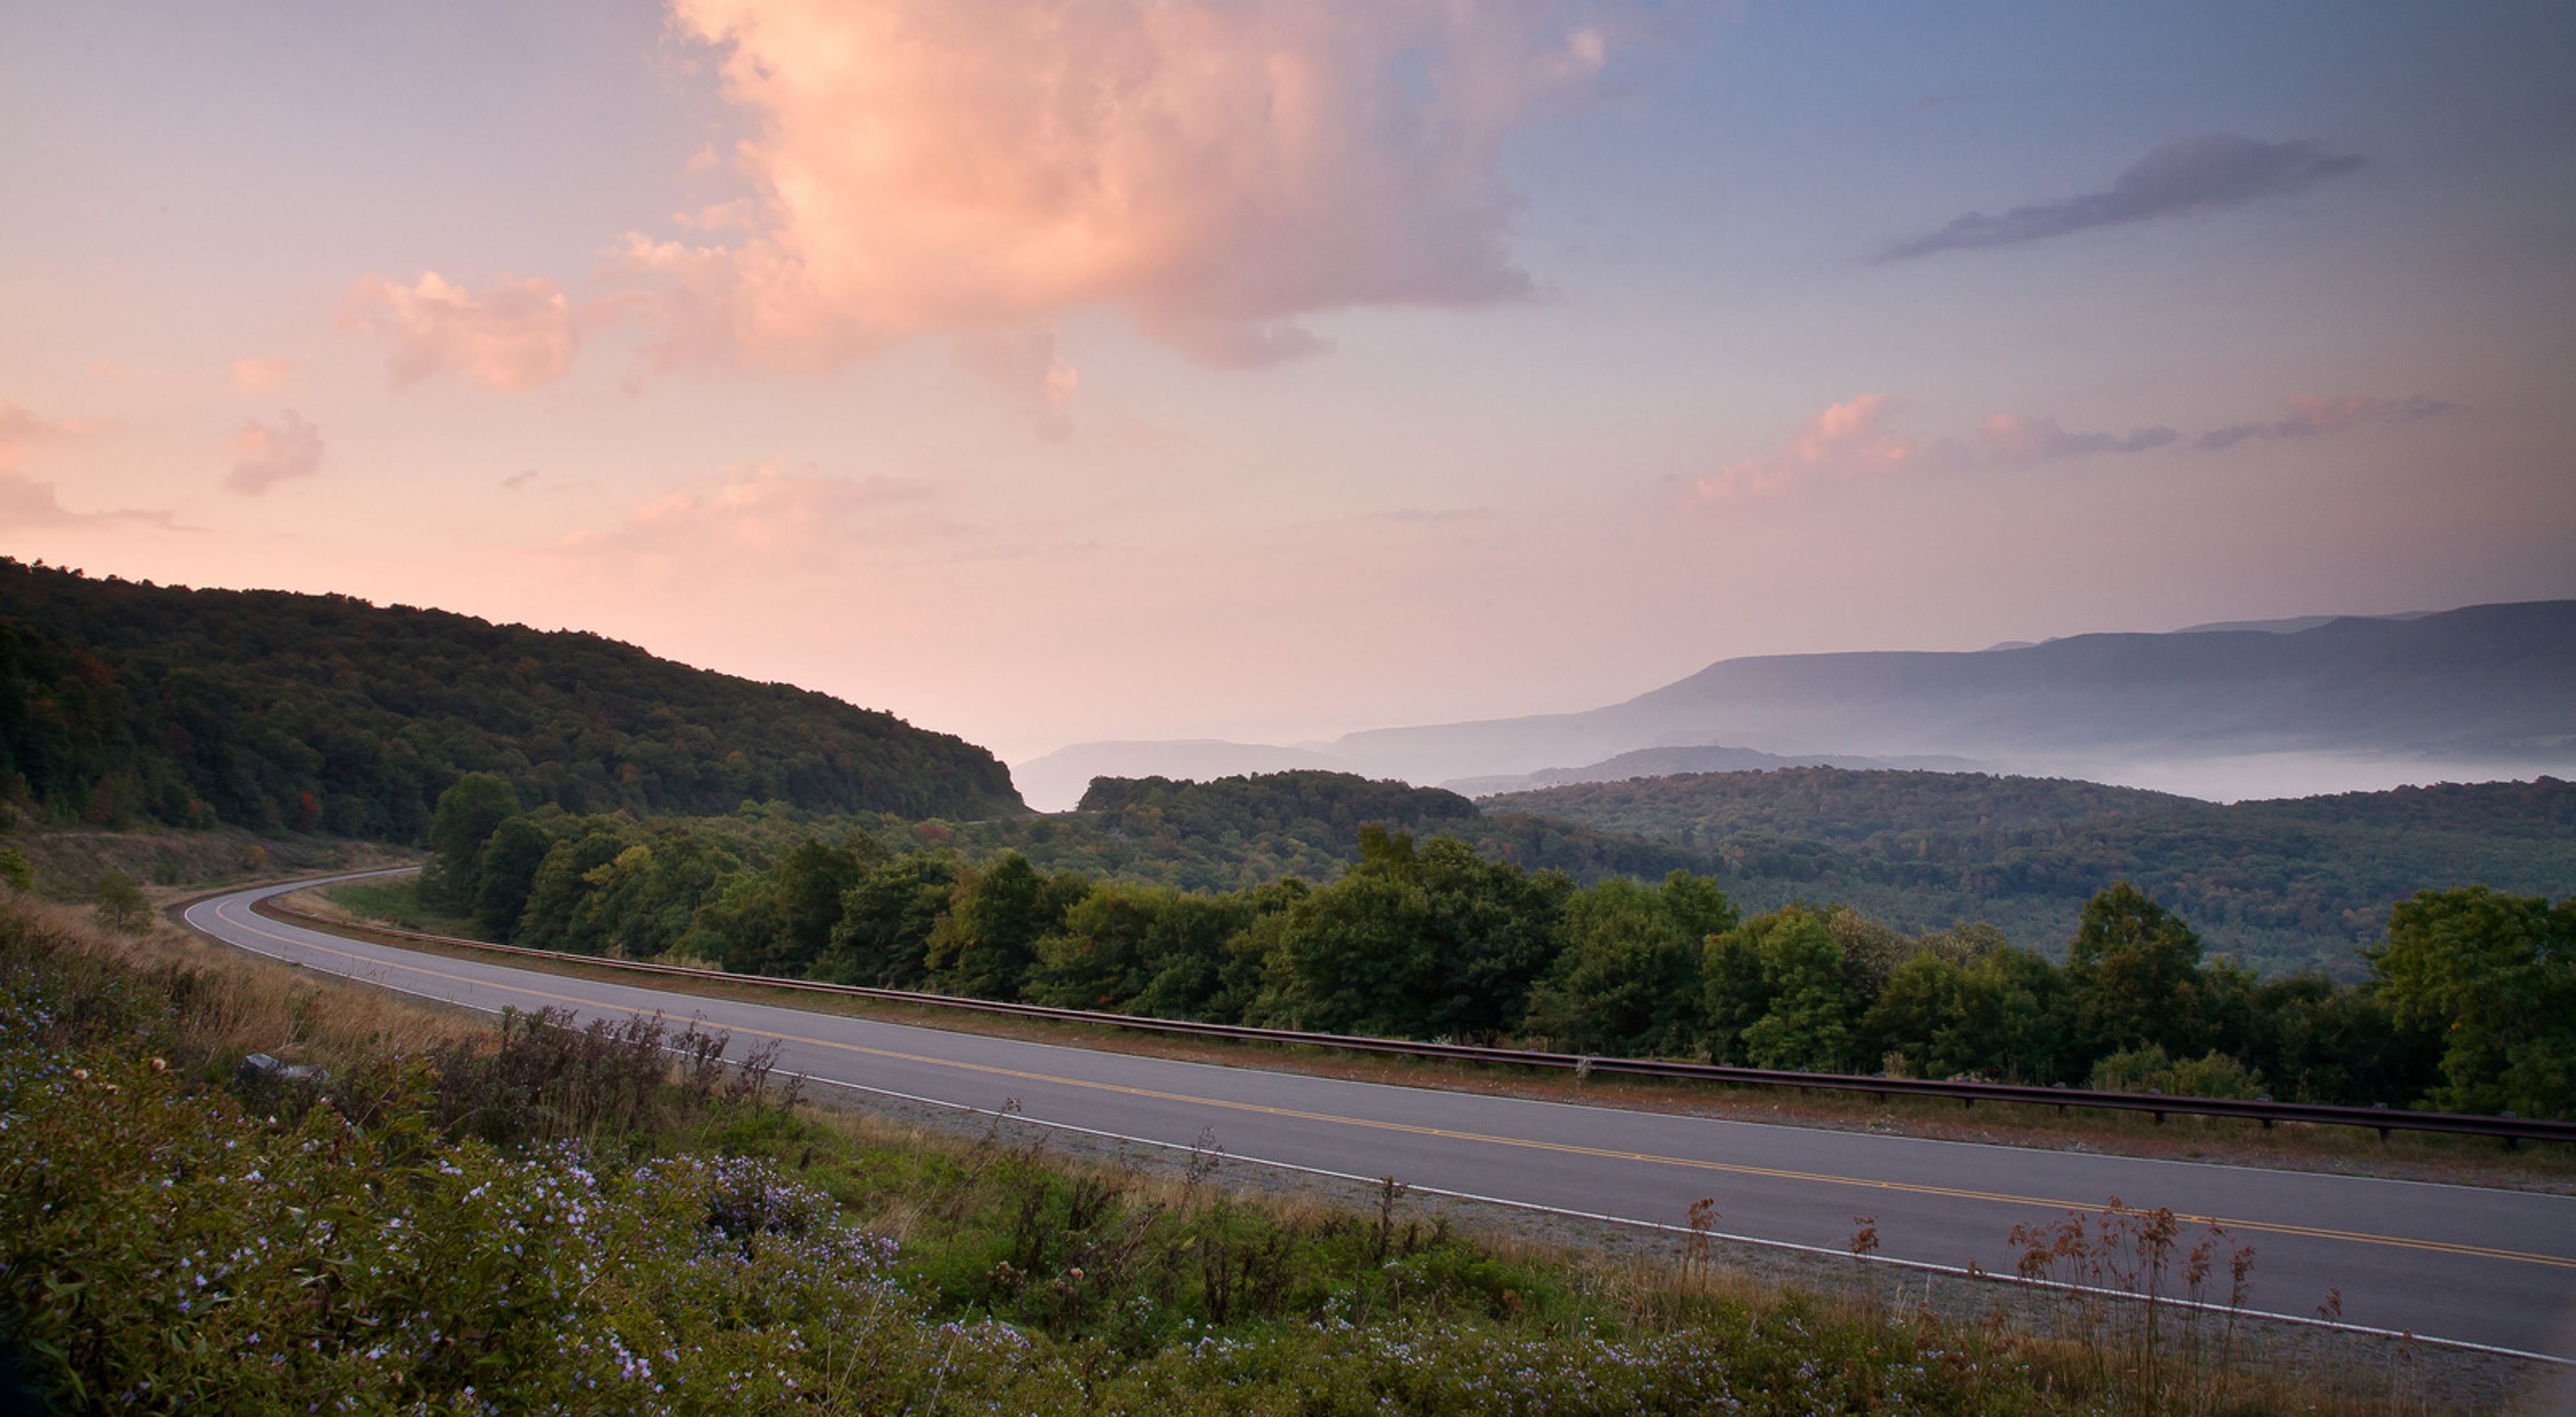 Photo of a highway running through the Appalachian Mountains of West Virginia at sunset.